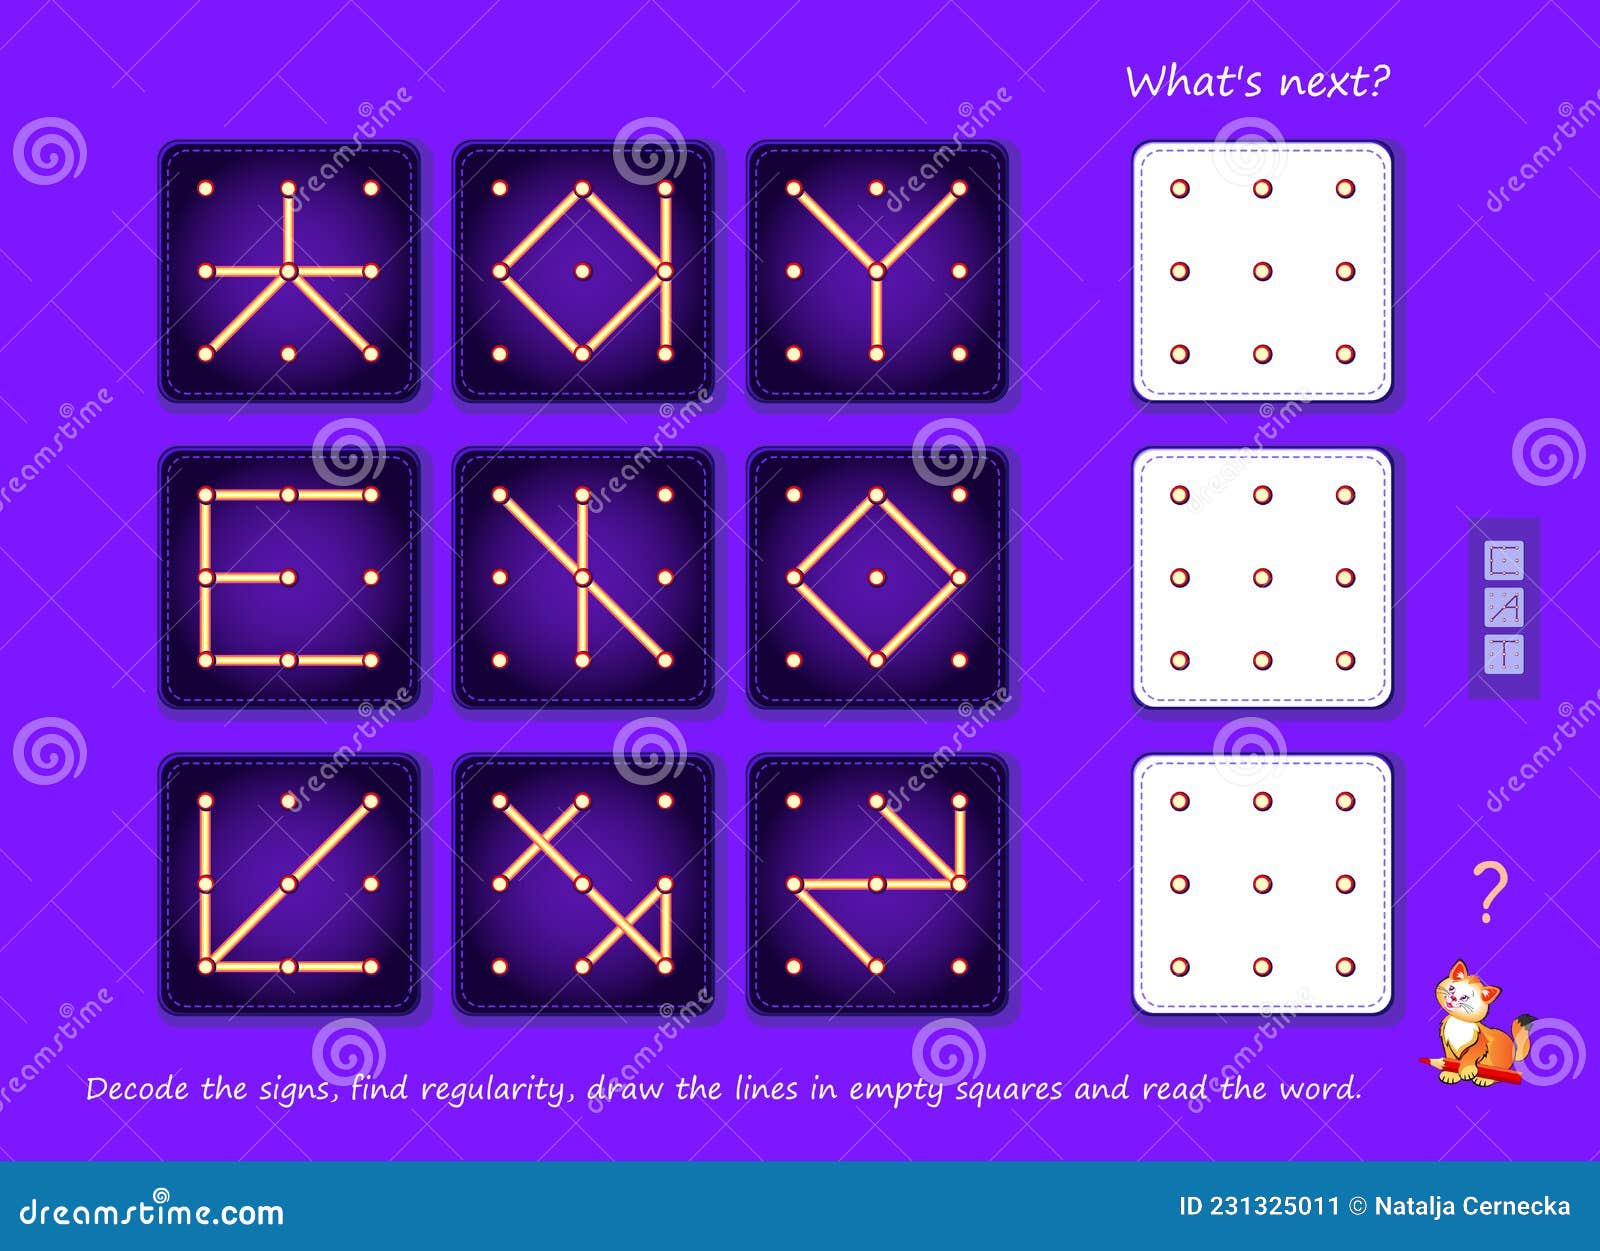 logic puzzle game for smartest. what`s next? decode the signs, find regularity, draw the lines in empty squares and read the word